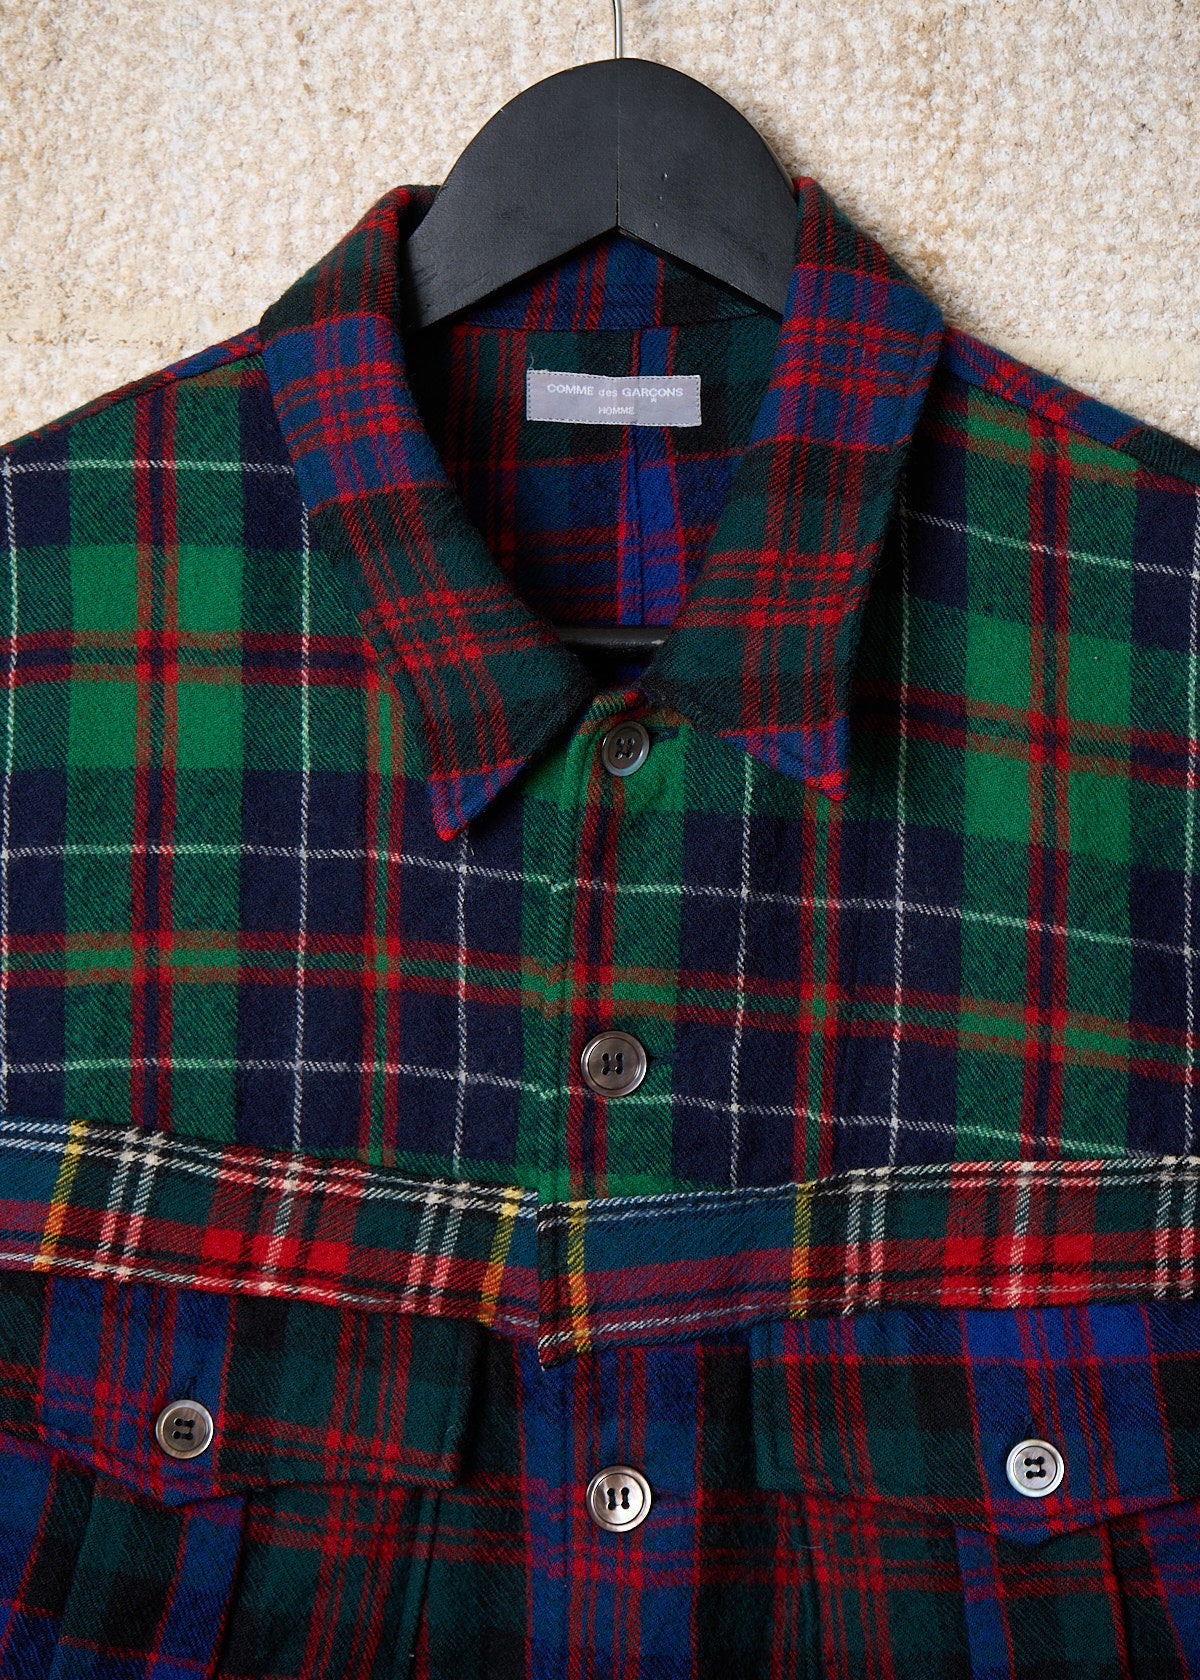 CDG HOMME MULTICOLOR PLAID PATCHWORK FLANNEL OVERSHIRT AW2001 - MEDIUM